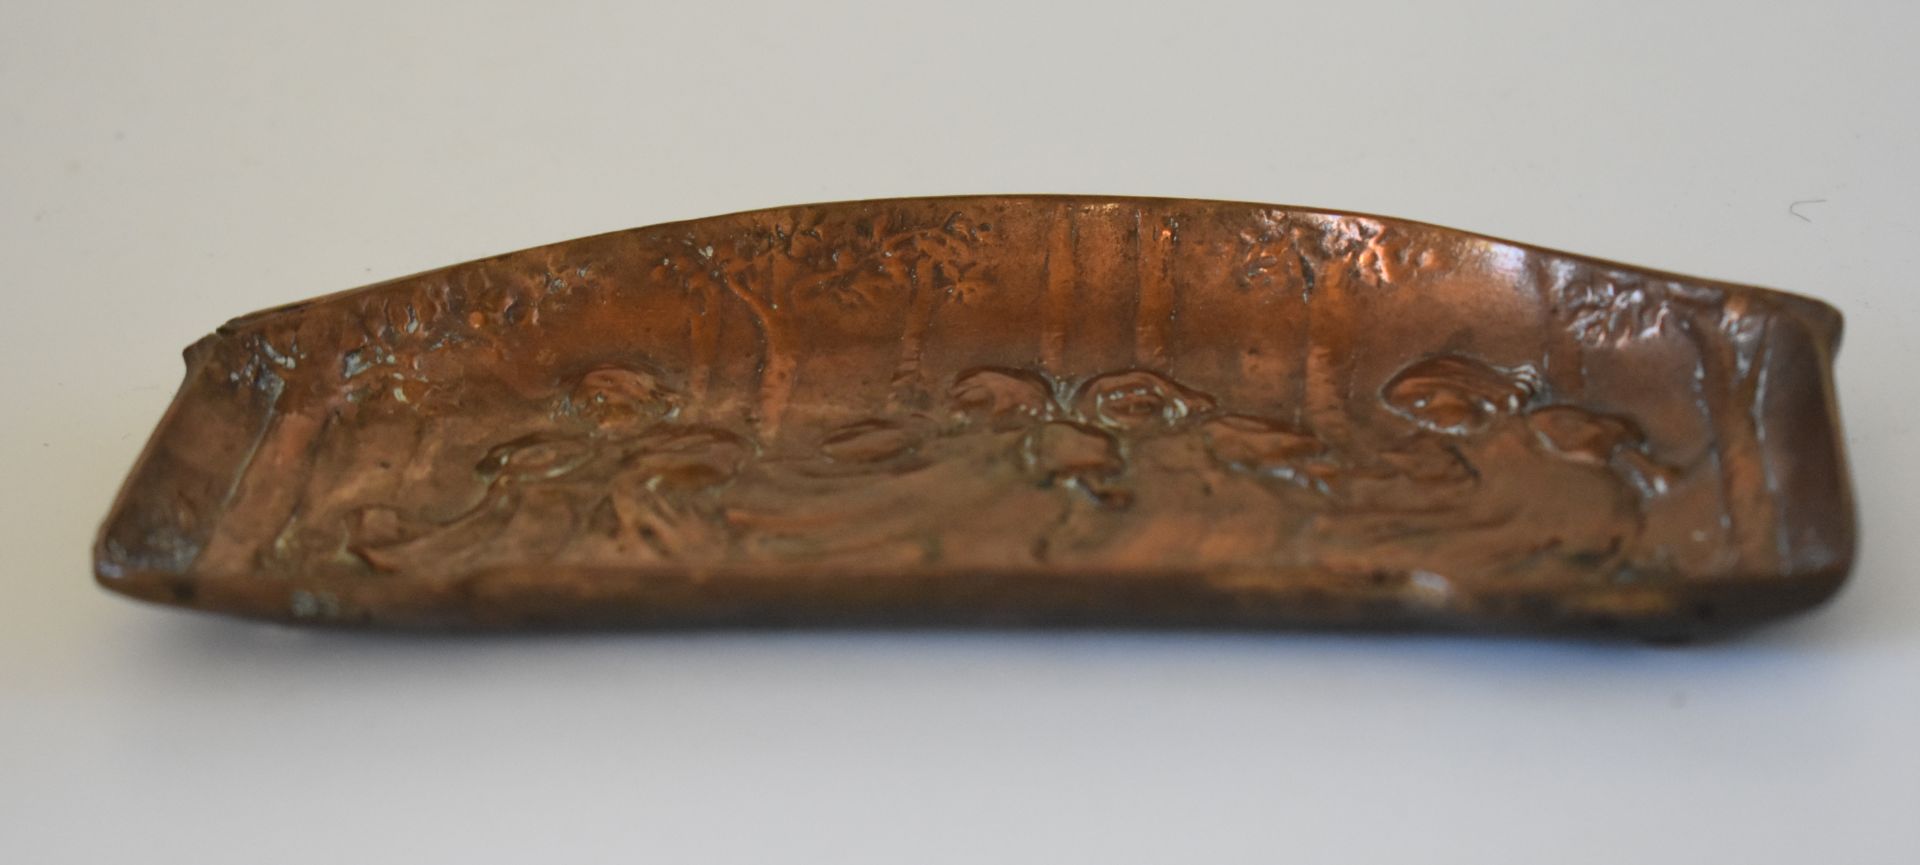 Circa. 1900 pin dish by Arthur Krupp (Austrian1856 -1938) Depicting a group of young girls dancing - Image 3 of 5